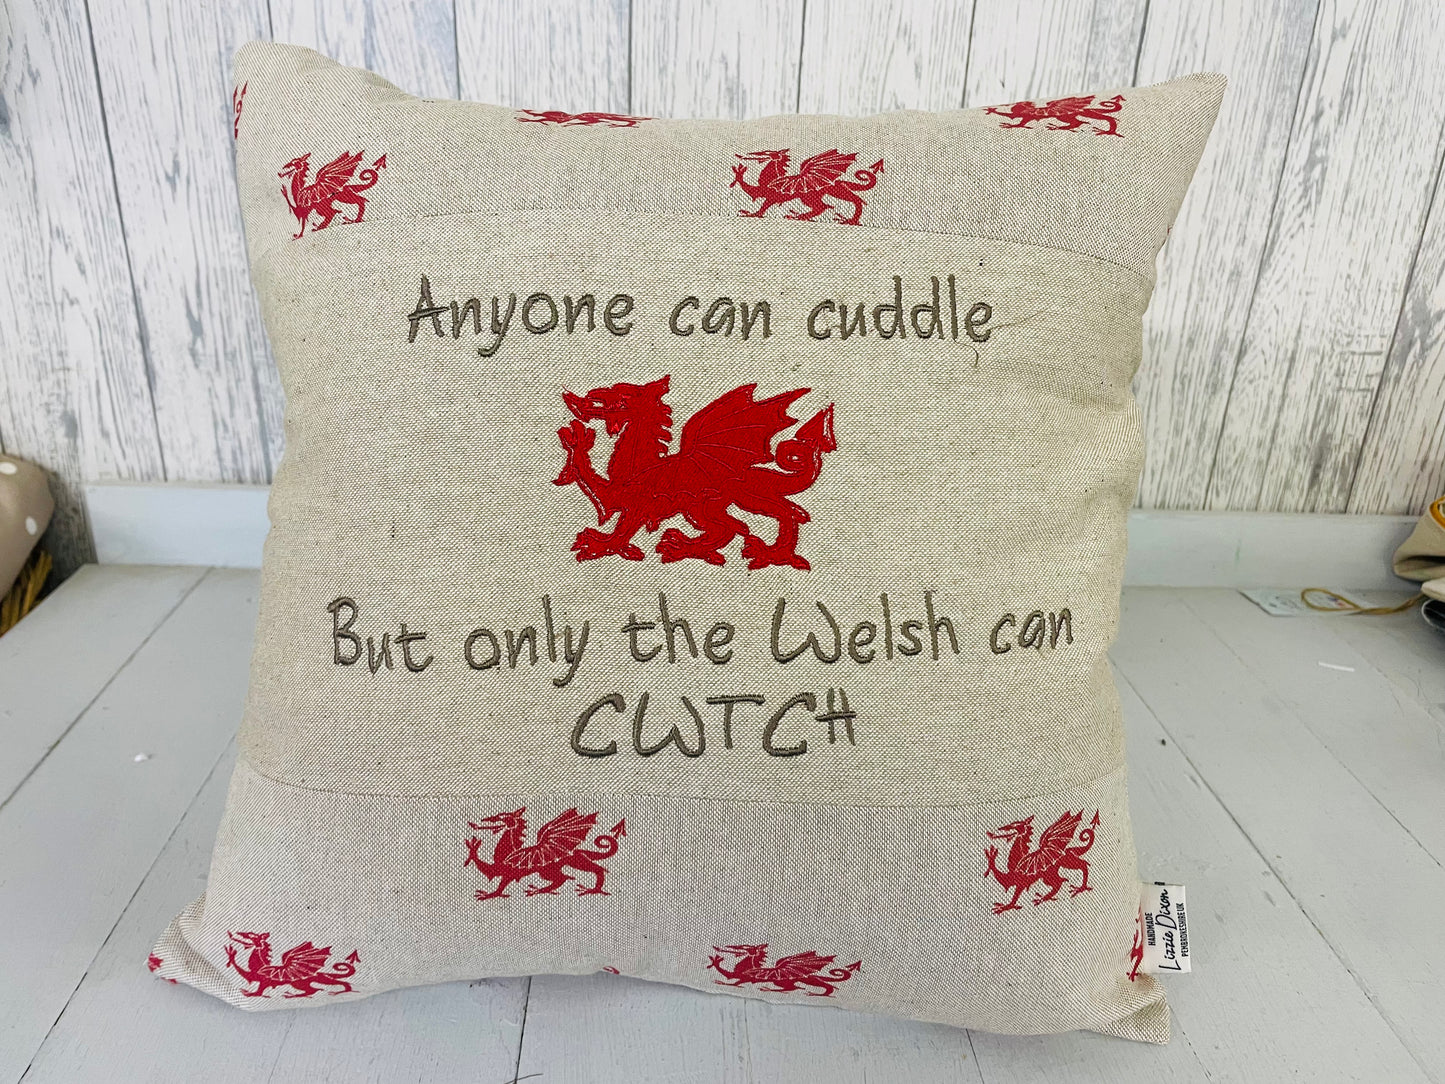 16” Anyone can cuddle but only the Welsh can Cwtch- Welsh Dragon Square Panel Cushion